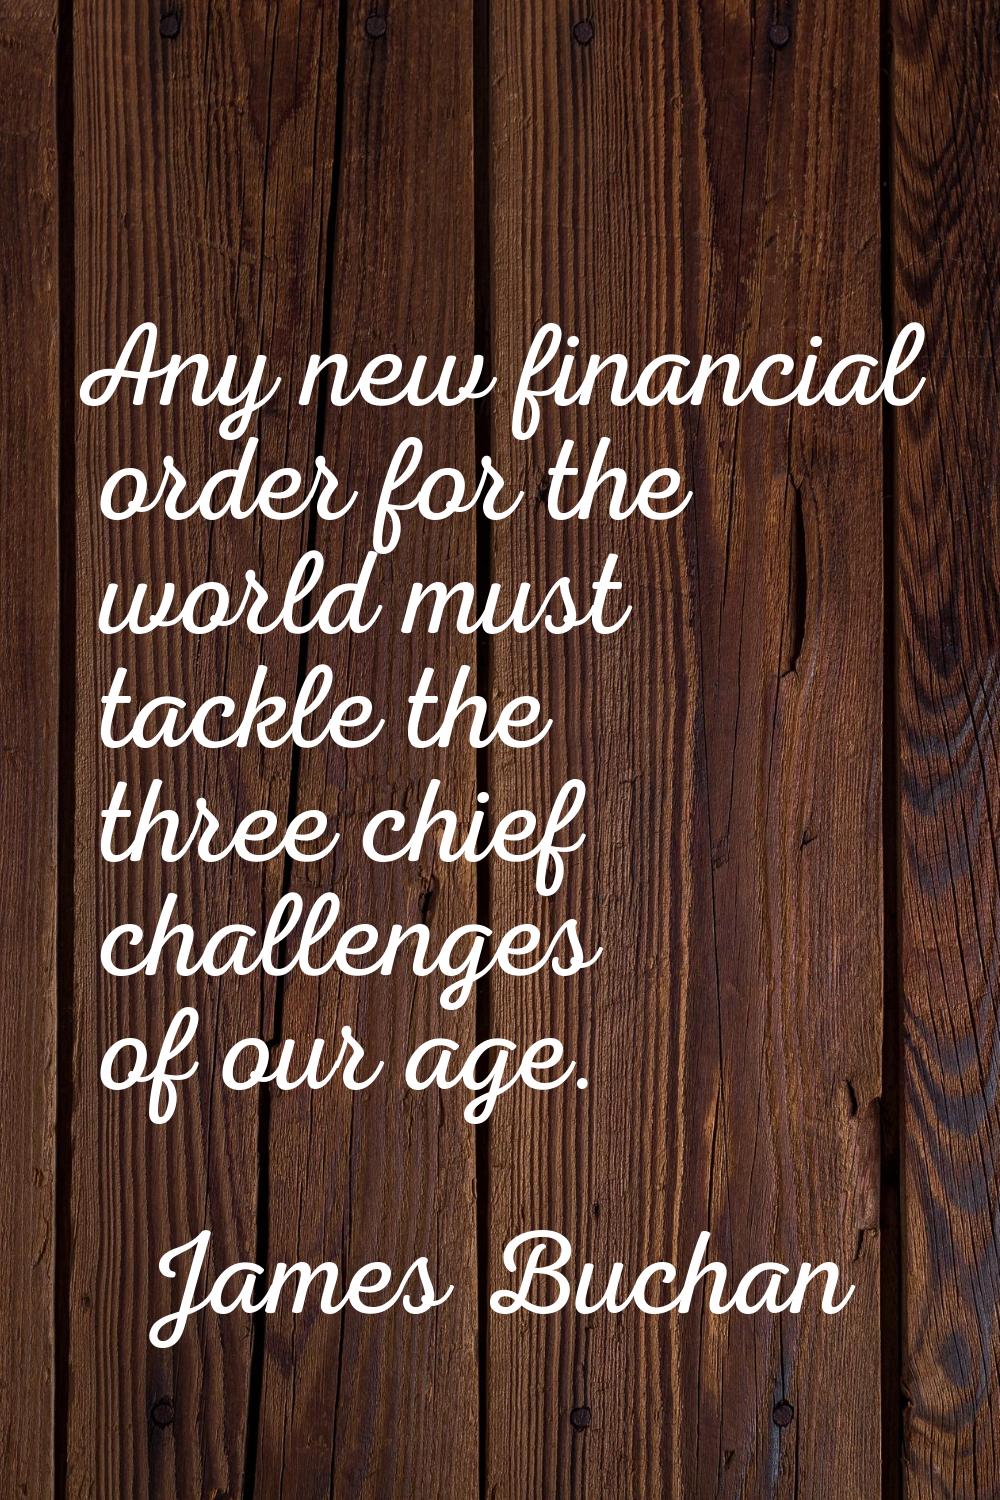 Any new financial order for the world must tackle the three chief challenges of our age.